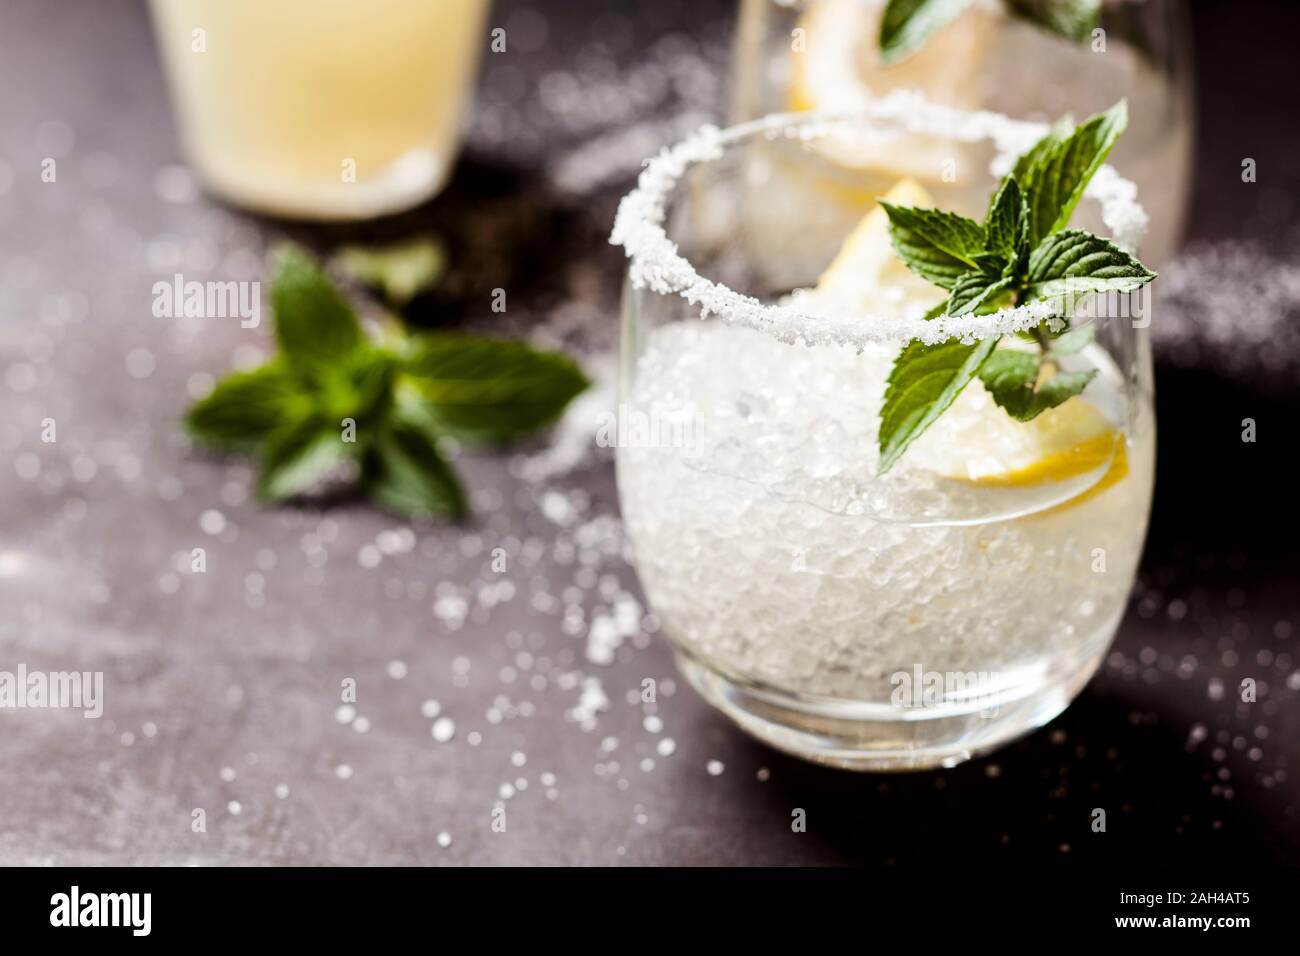 Margarita cocktails with lemon and mint leaves Stock Photo